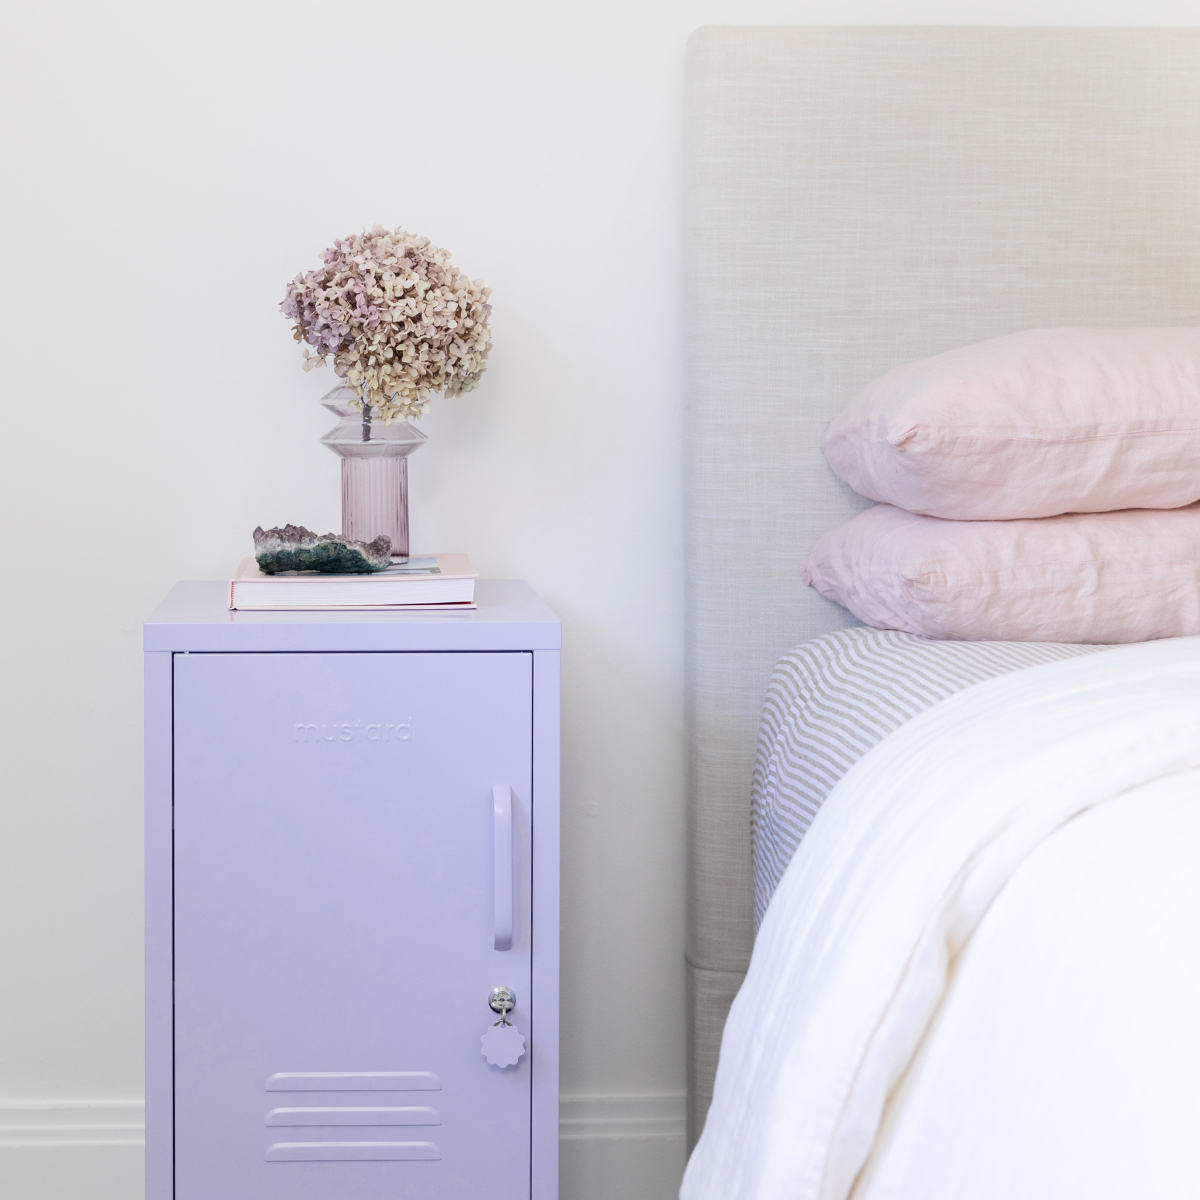 The Shorty Locker in Lilac By Mustard Made